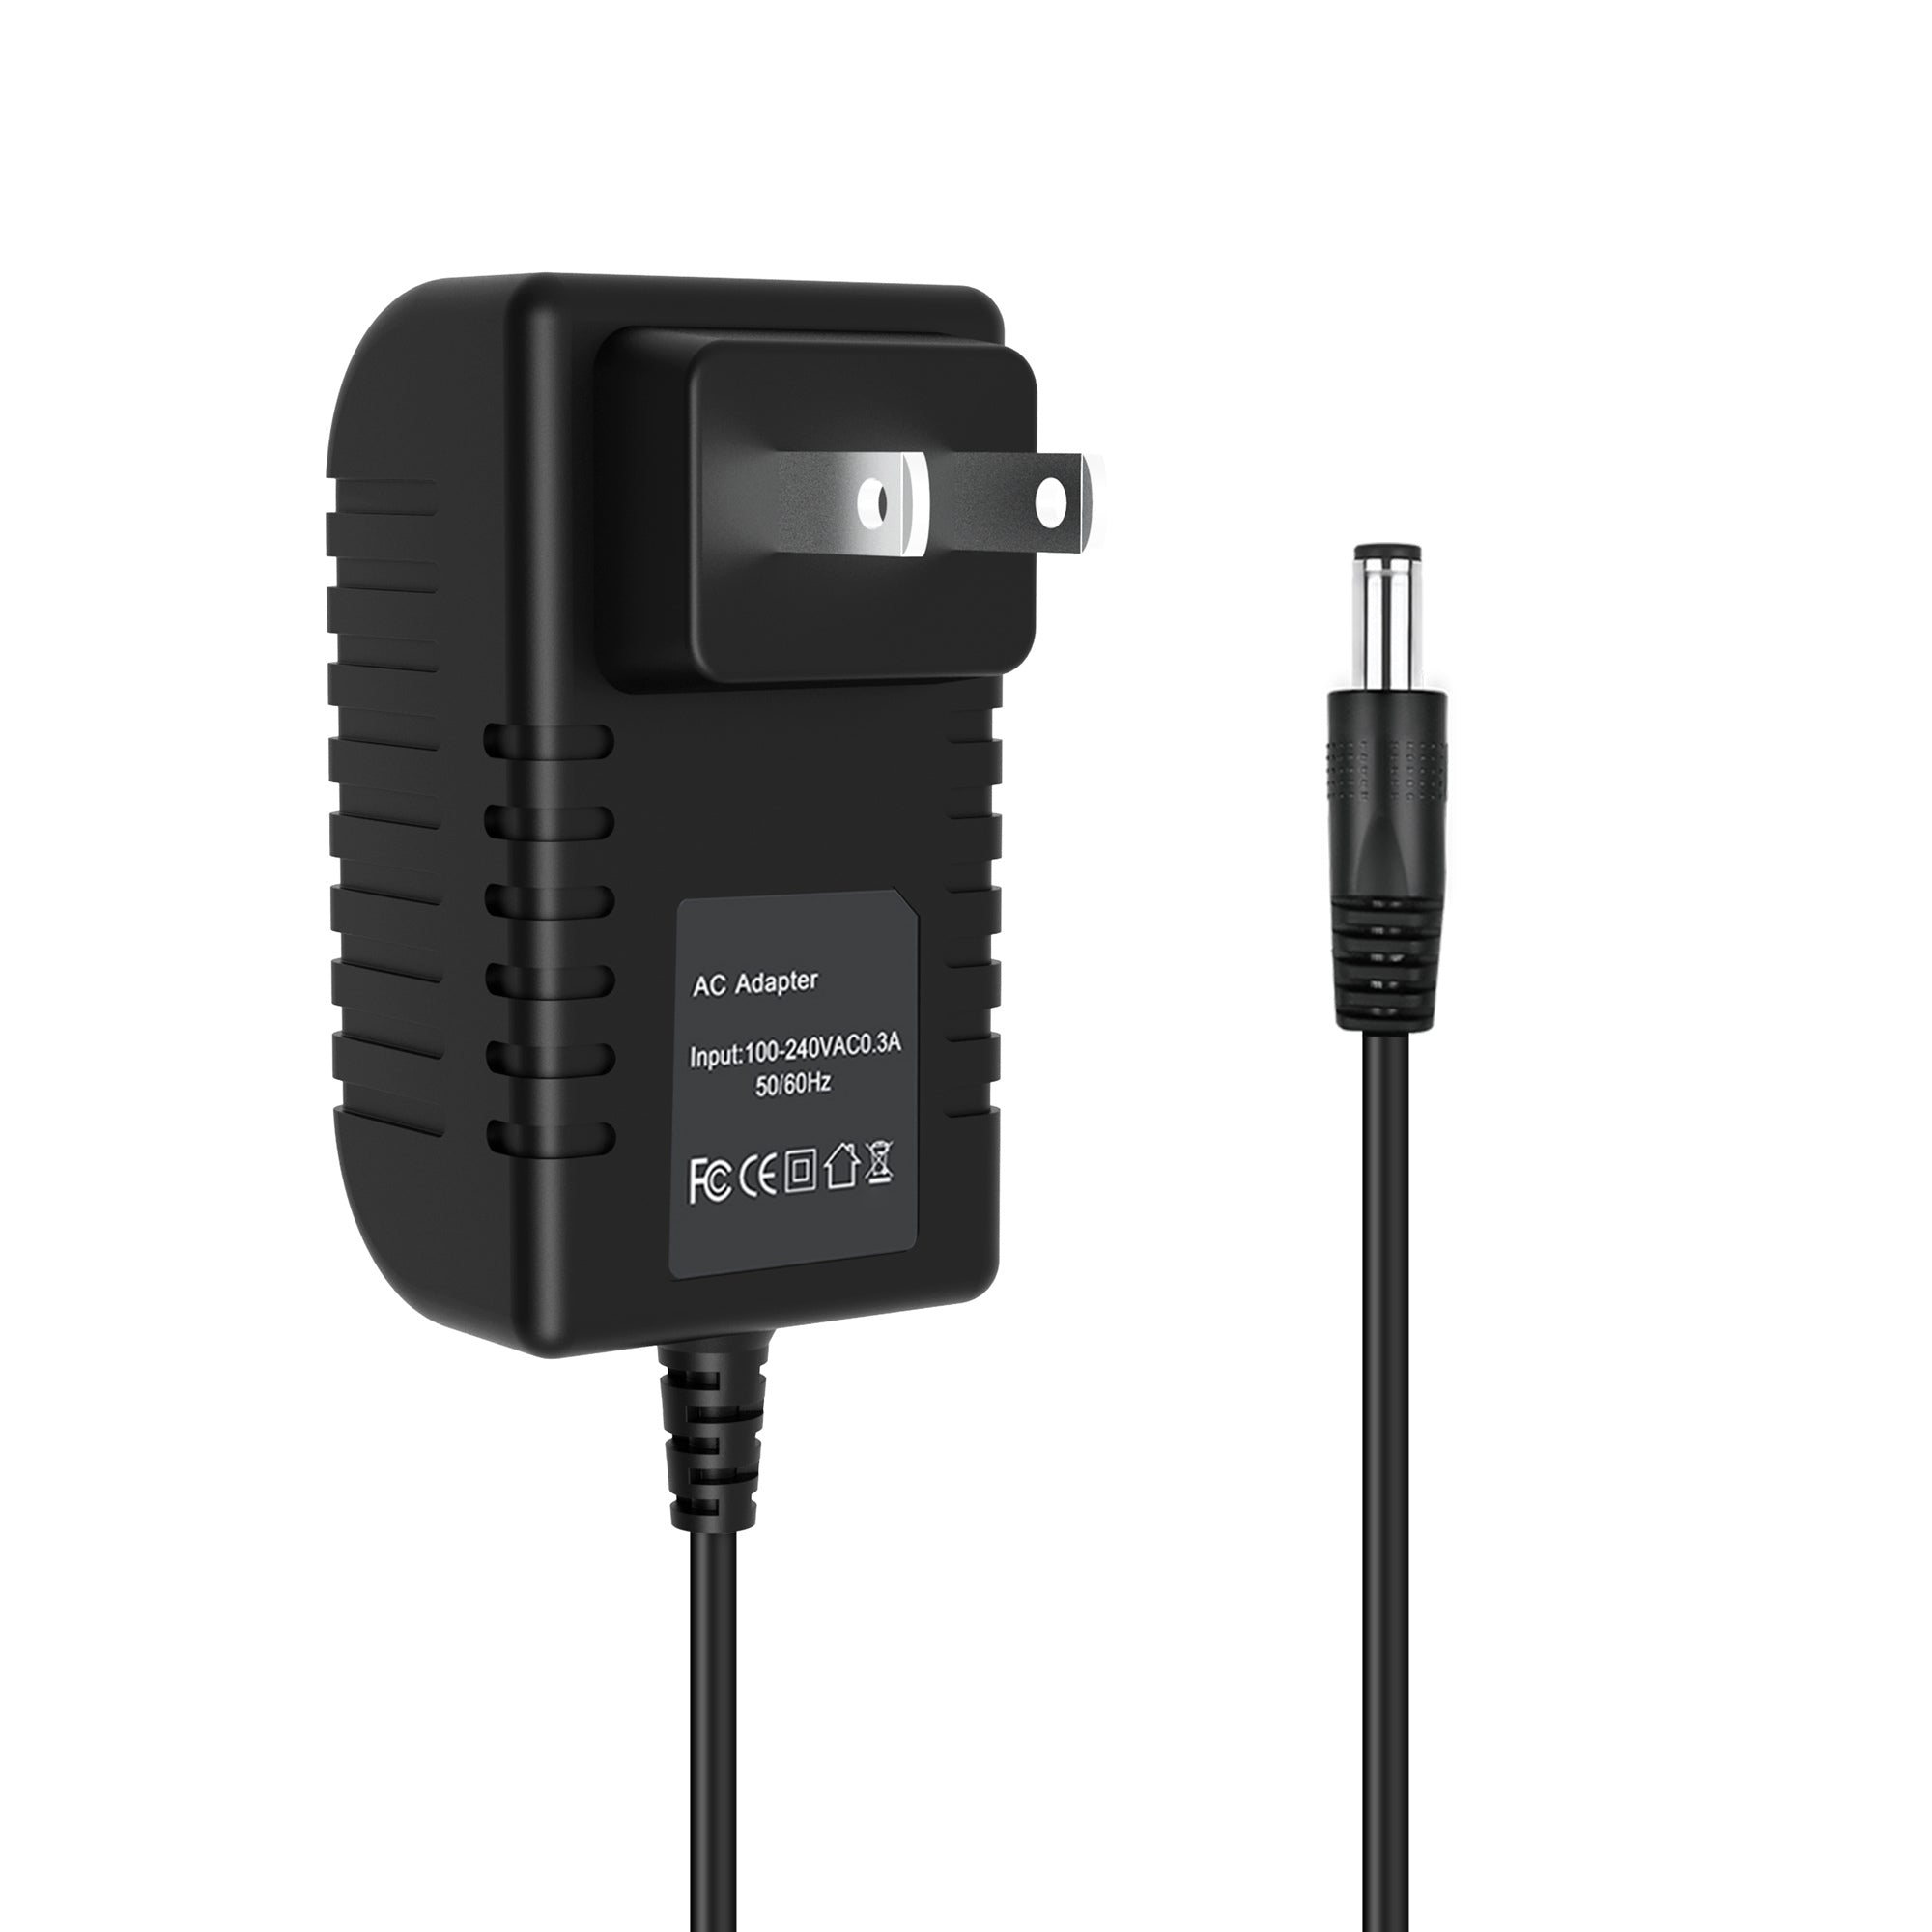 AbleGrid AC/DC Adapter Compatible with D Dunlop Model No.: AD-1815 ECB 004 ECB004 US P/N: 19089001701 18VDC World Wide Use Power Supply Cord Cable Wall Charger Mains PSU